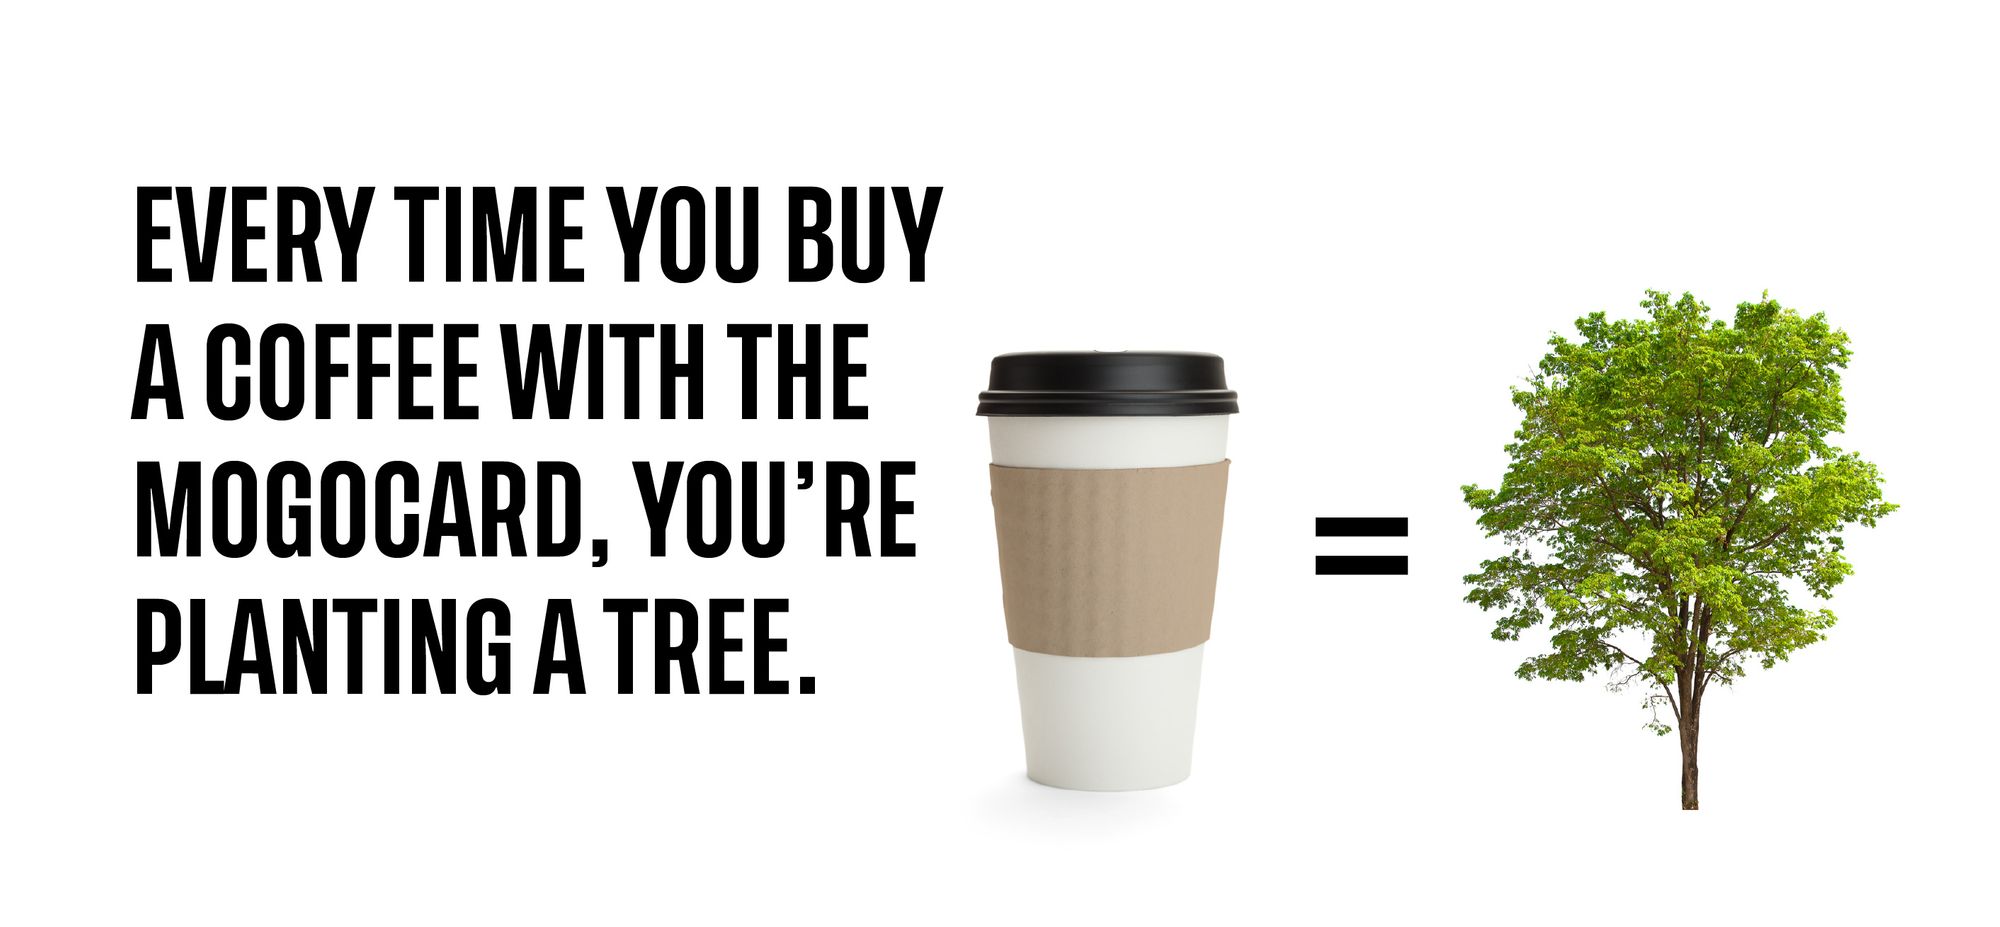 Every time you buy a coffee with the MogoCard, you're planting a tree. 